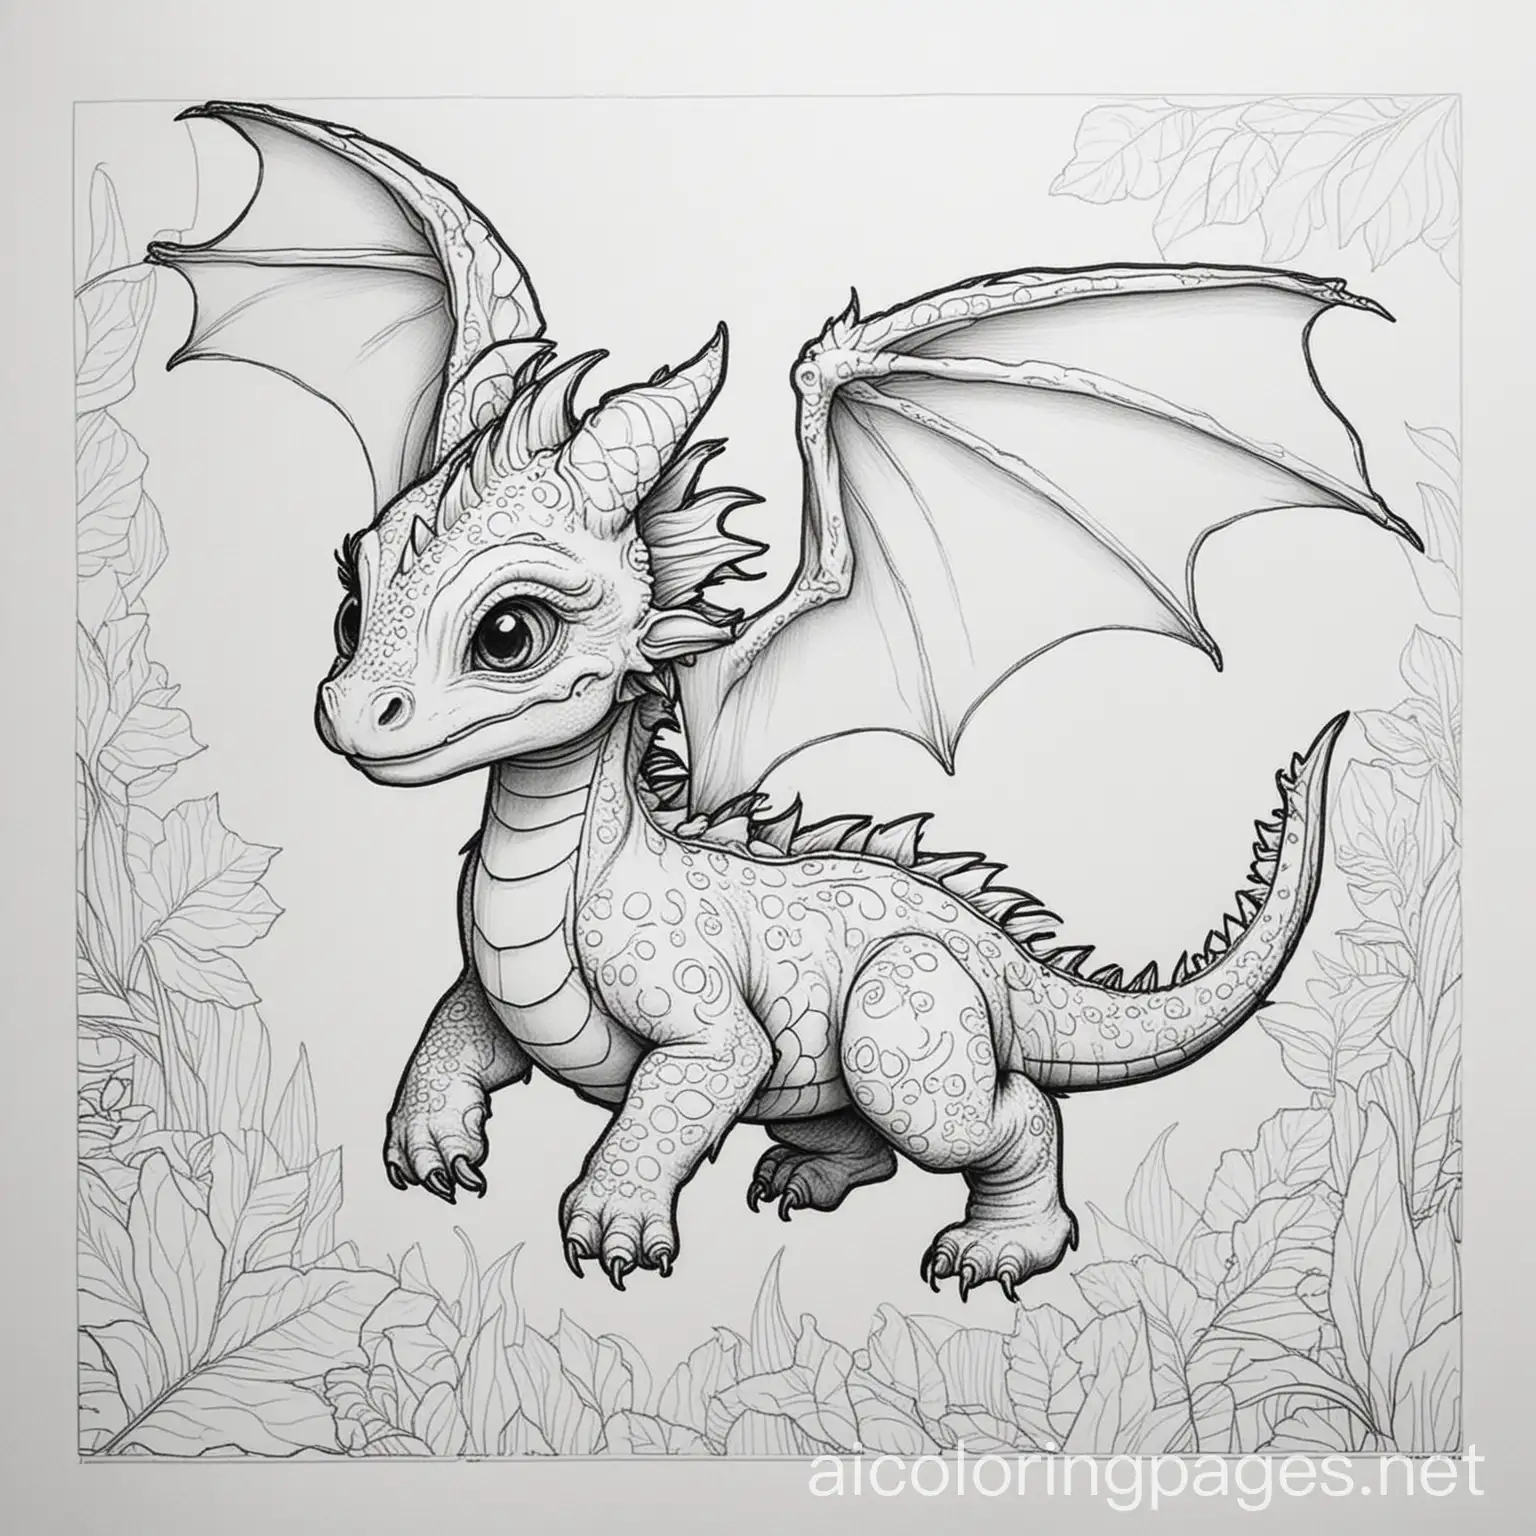 Baby dragon flying High detail Adult coloring book, Coloring Page, black and white, line art, white background, Simplicity, Ample White Space. The background of the coloring page is plain white to make it easy for young children to color within the lines. The outlines of all the subjects are easy to distinguish, making it simple for kids to color without too much difficulty, Coloring Page, black and white, line art, white background, Simplicity, Ample White Space. The background of the coloring page is plain white to make it easy for young children to color within the lines. The outlines of all the subjects are easy to distinguish, making it simple for kids to color without too much difficulty